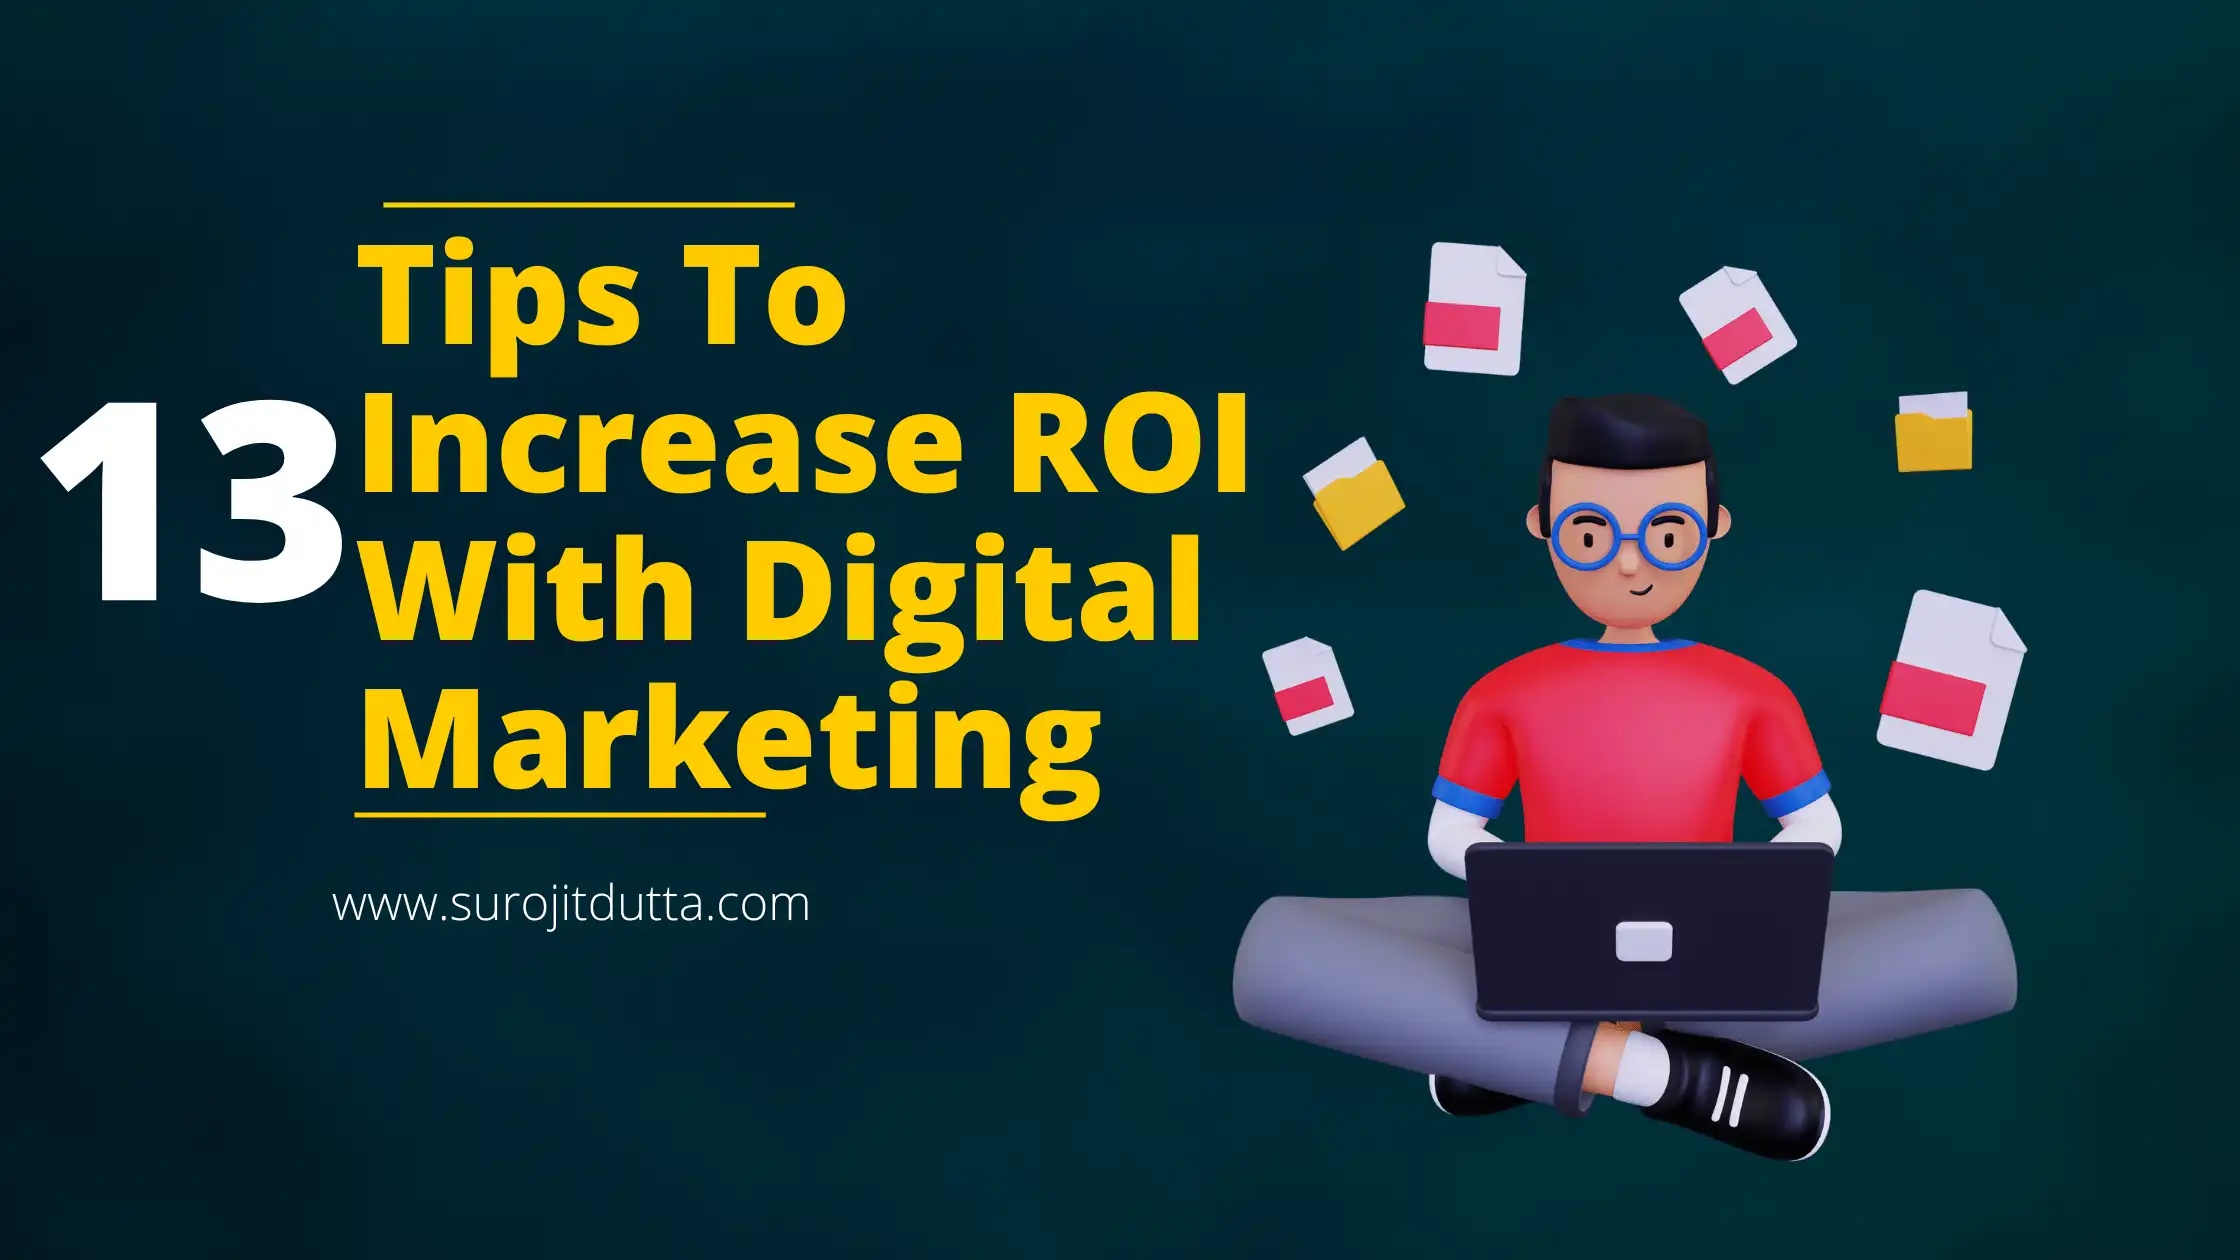 Tips To Increase ROI With Digital Marketing